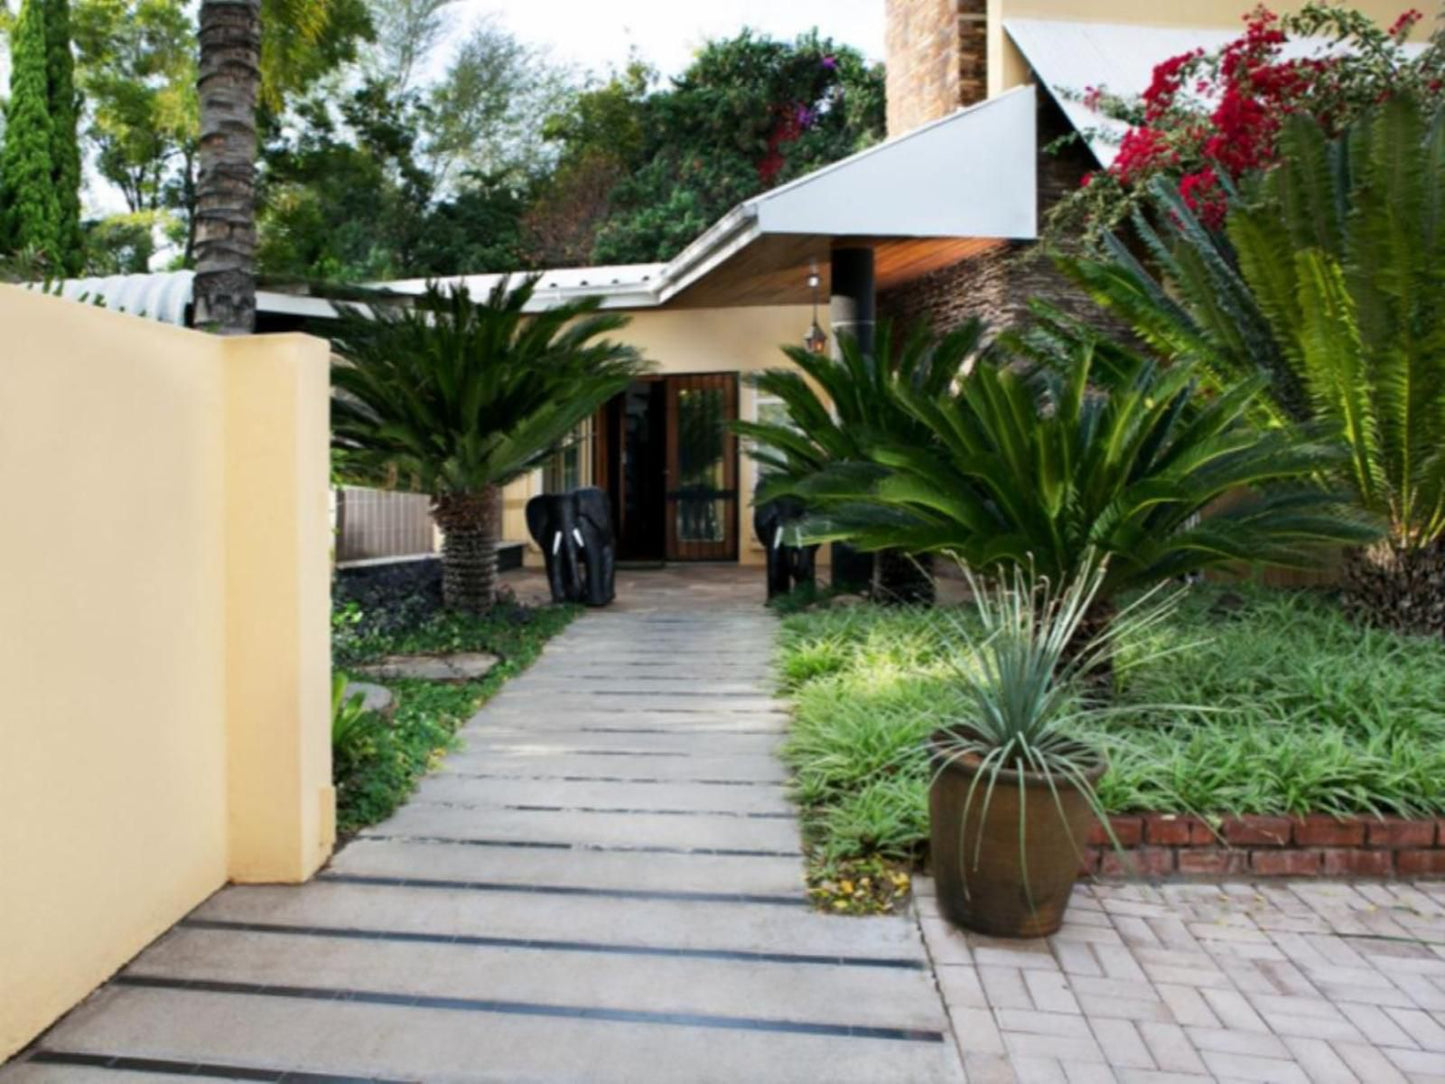 River Bank Lodge Upington Northern Cape South Africa House, Building, Architecture, Palm Tree, Plant, Nature, Wood, Garden